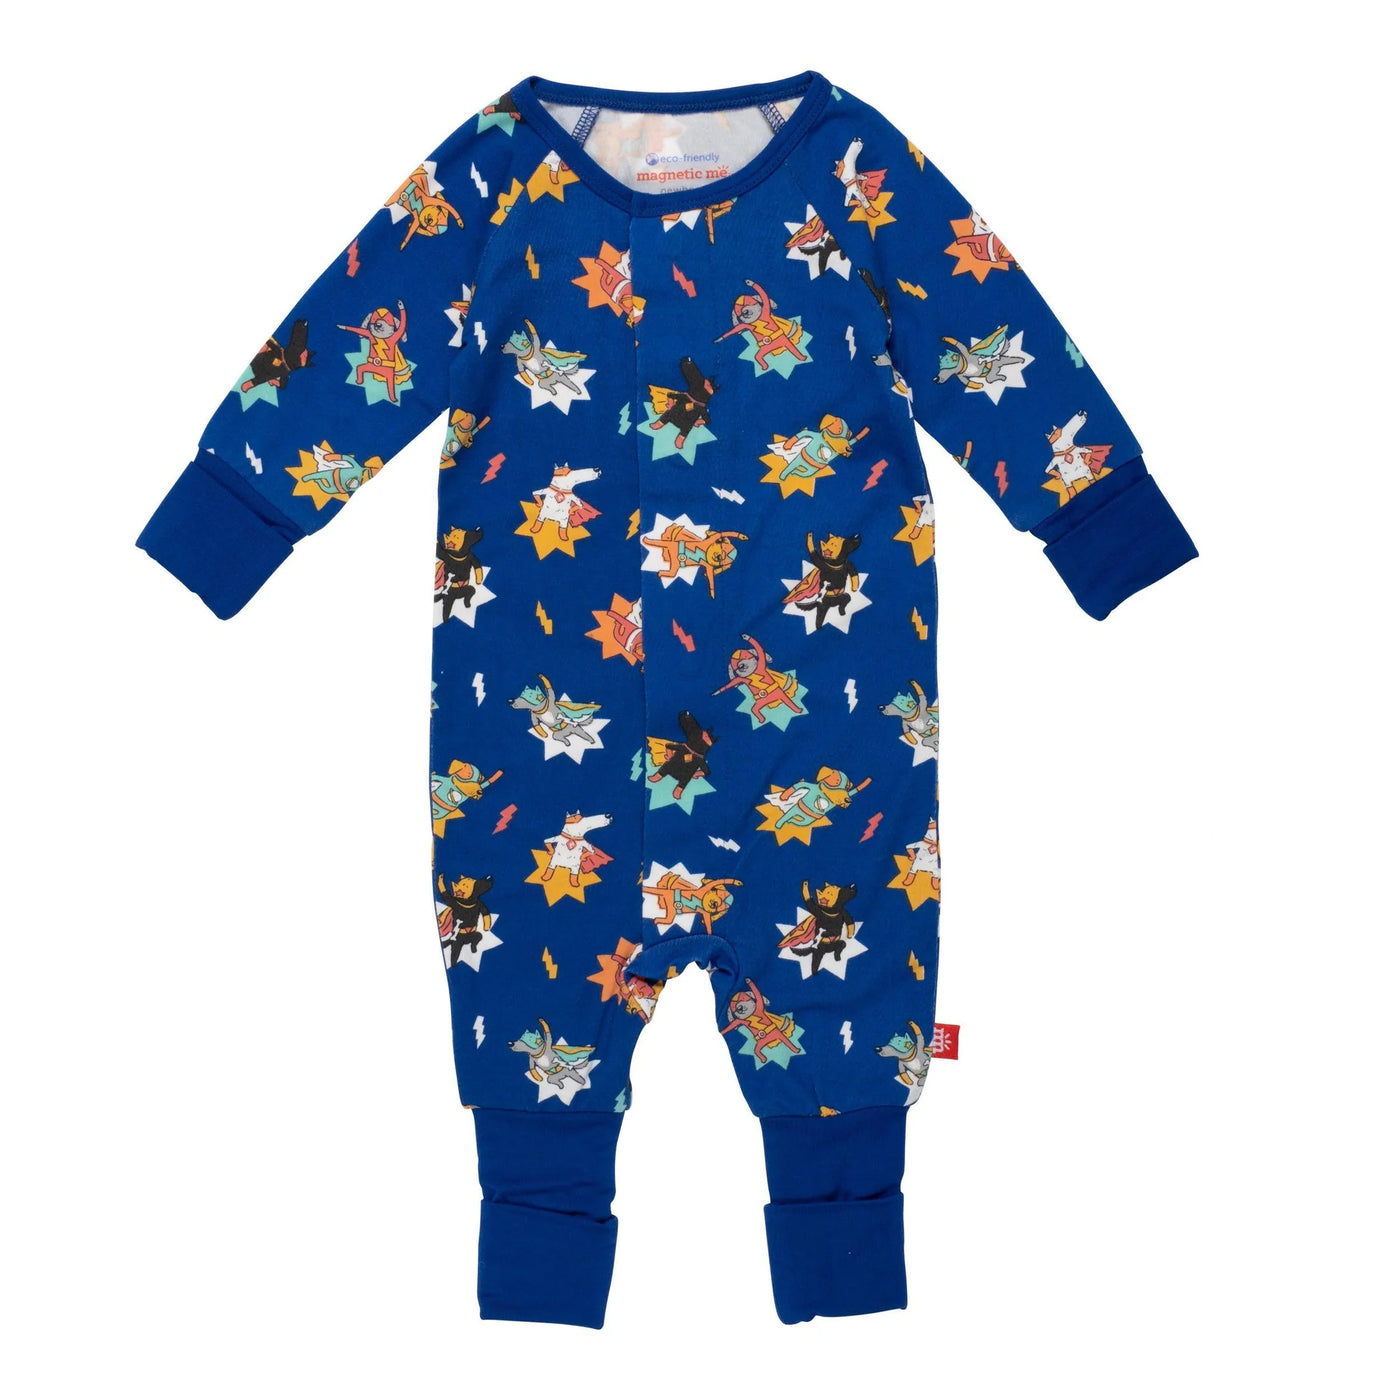 Magnetic Me Su-Paw Star Coverall